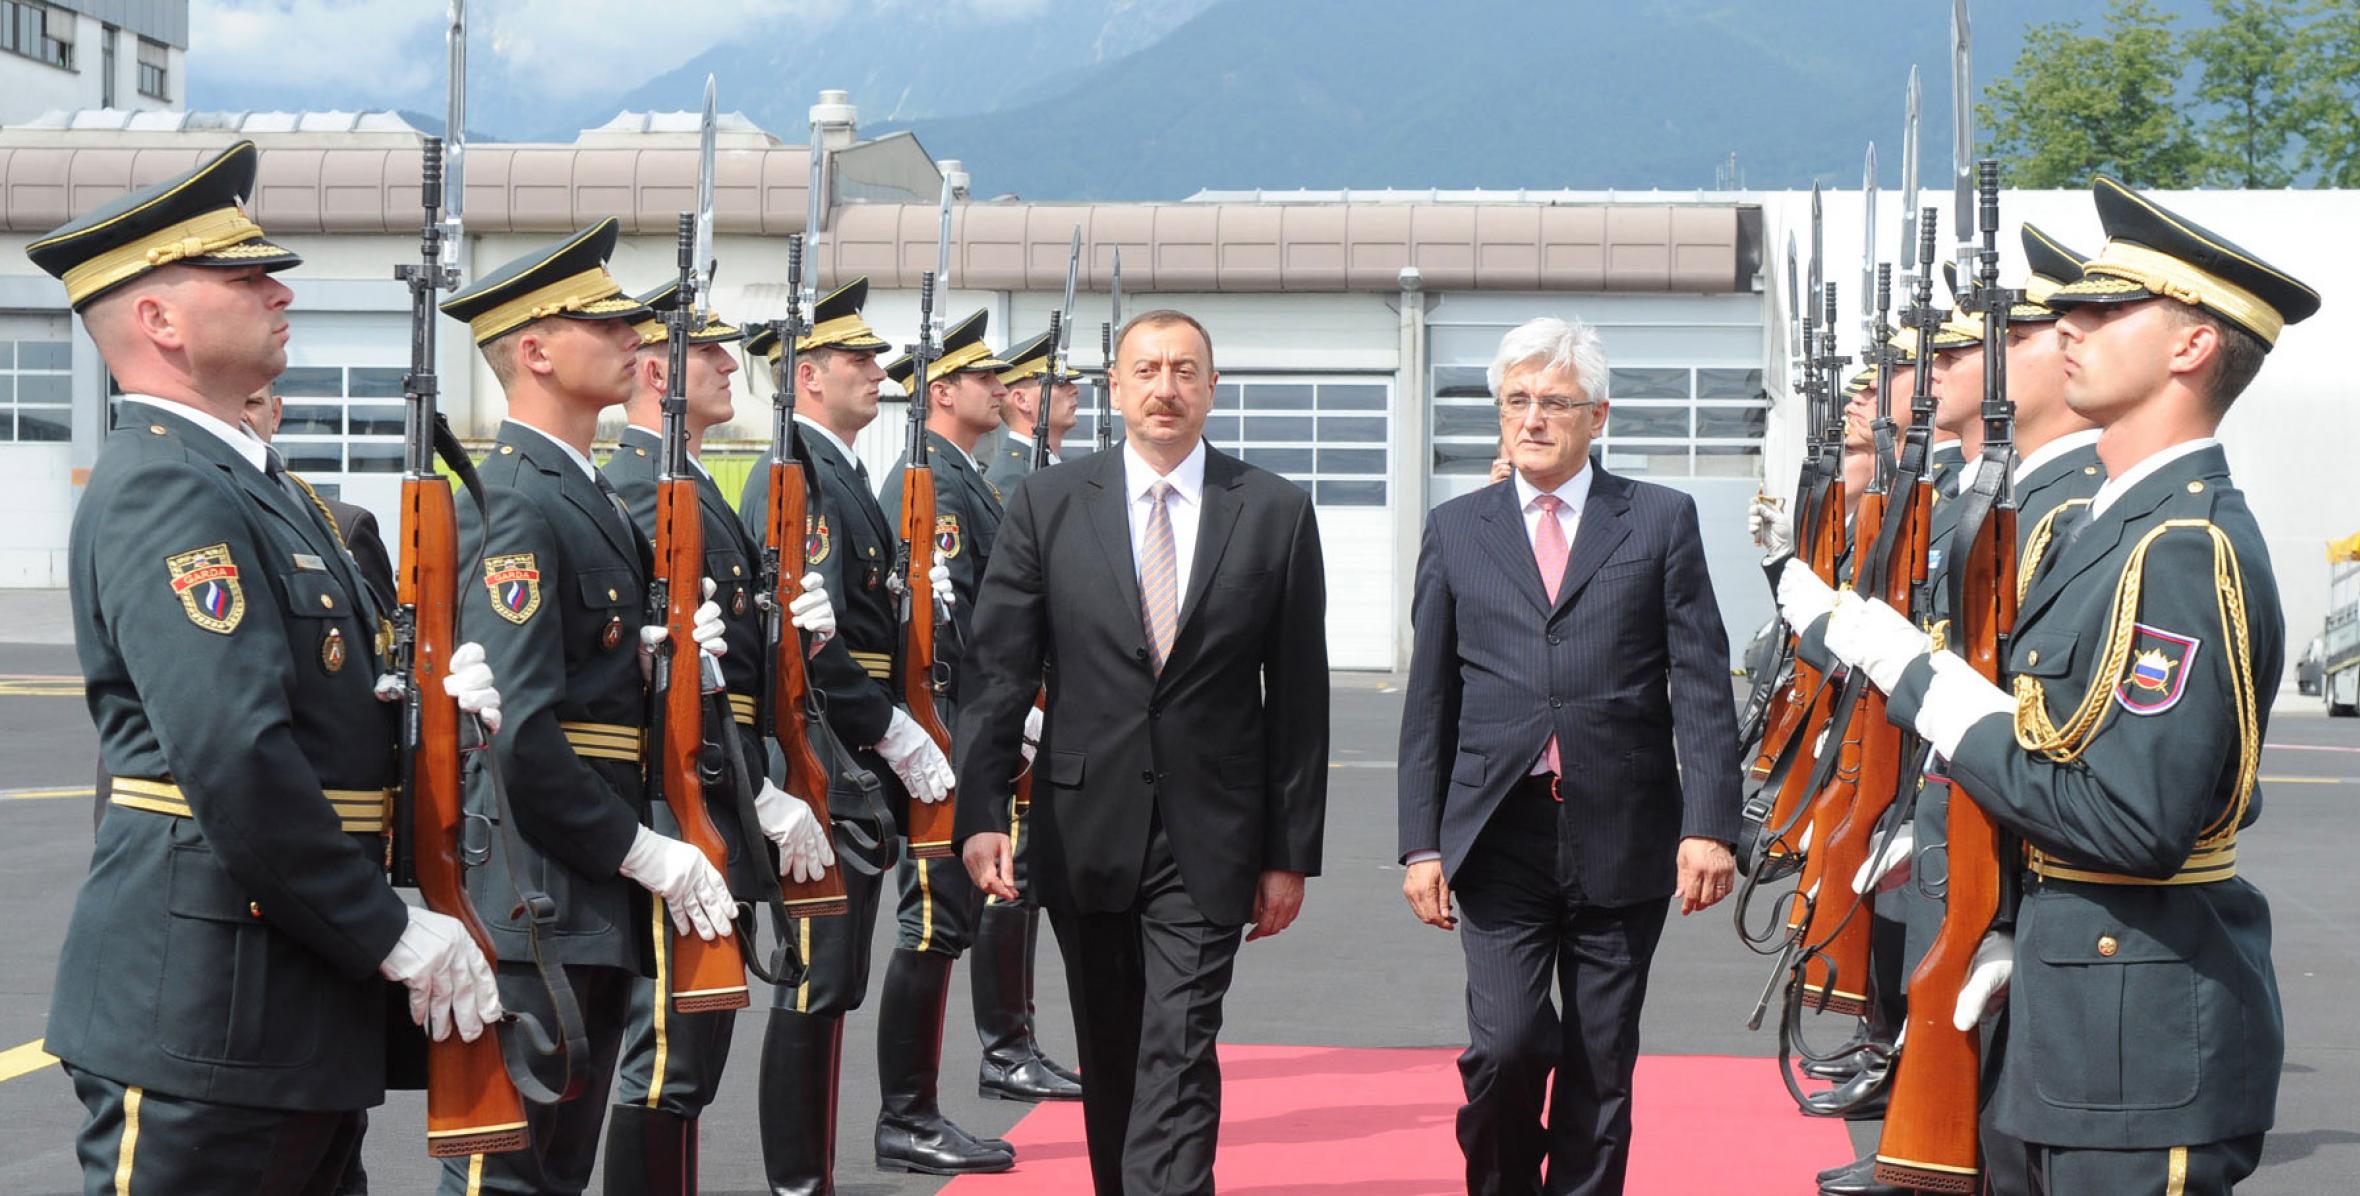 Ilham Aliyev’s official visit to the Republic of Slovenia ended